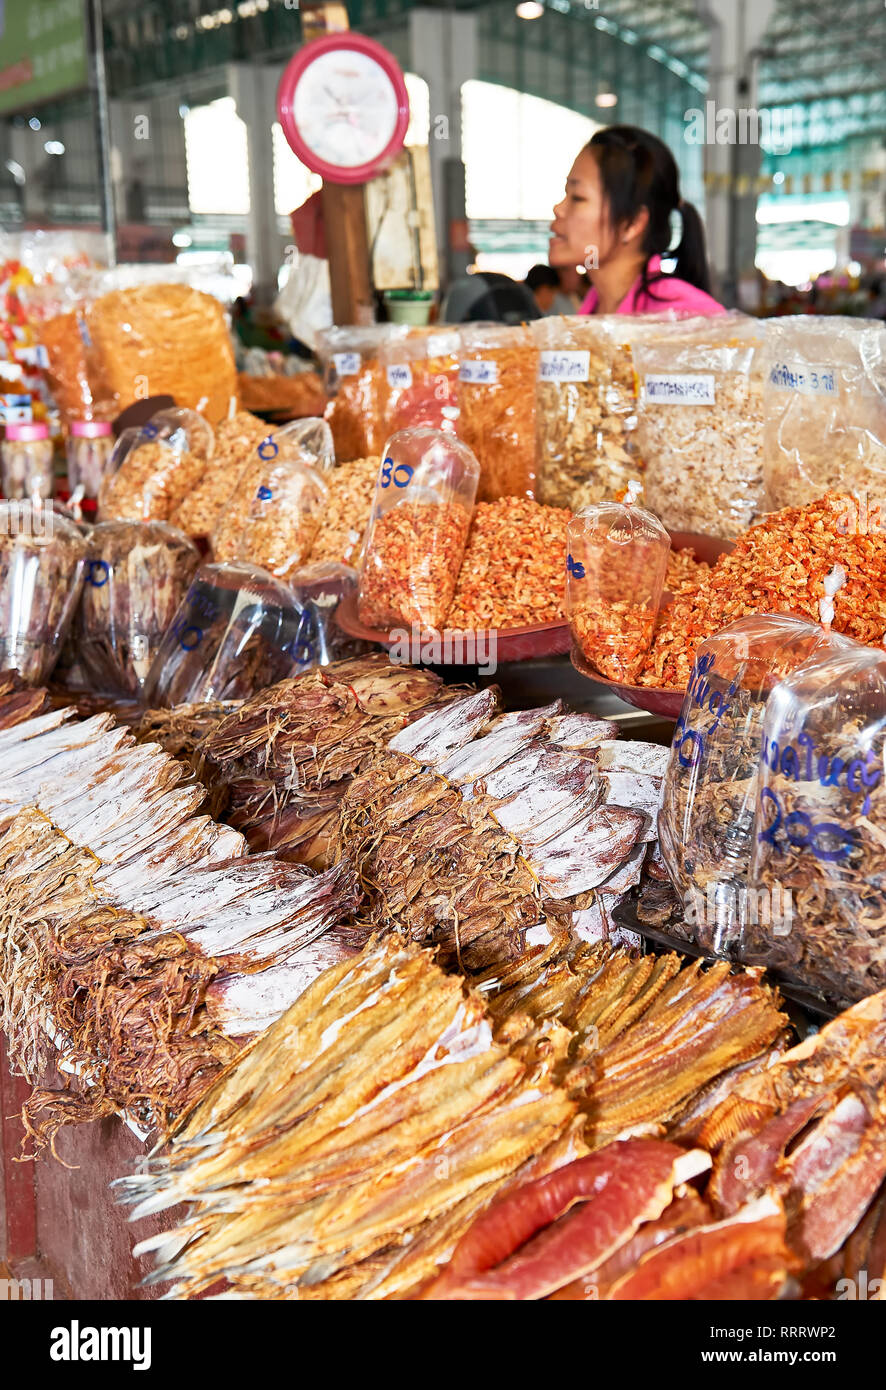 Cha-am, Phetchaburi, Thailand - June 25, 2011: Female vendor selling a variety of salted dried fish, squid and seafood presented at the central market Stock Photo